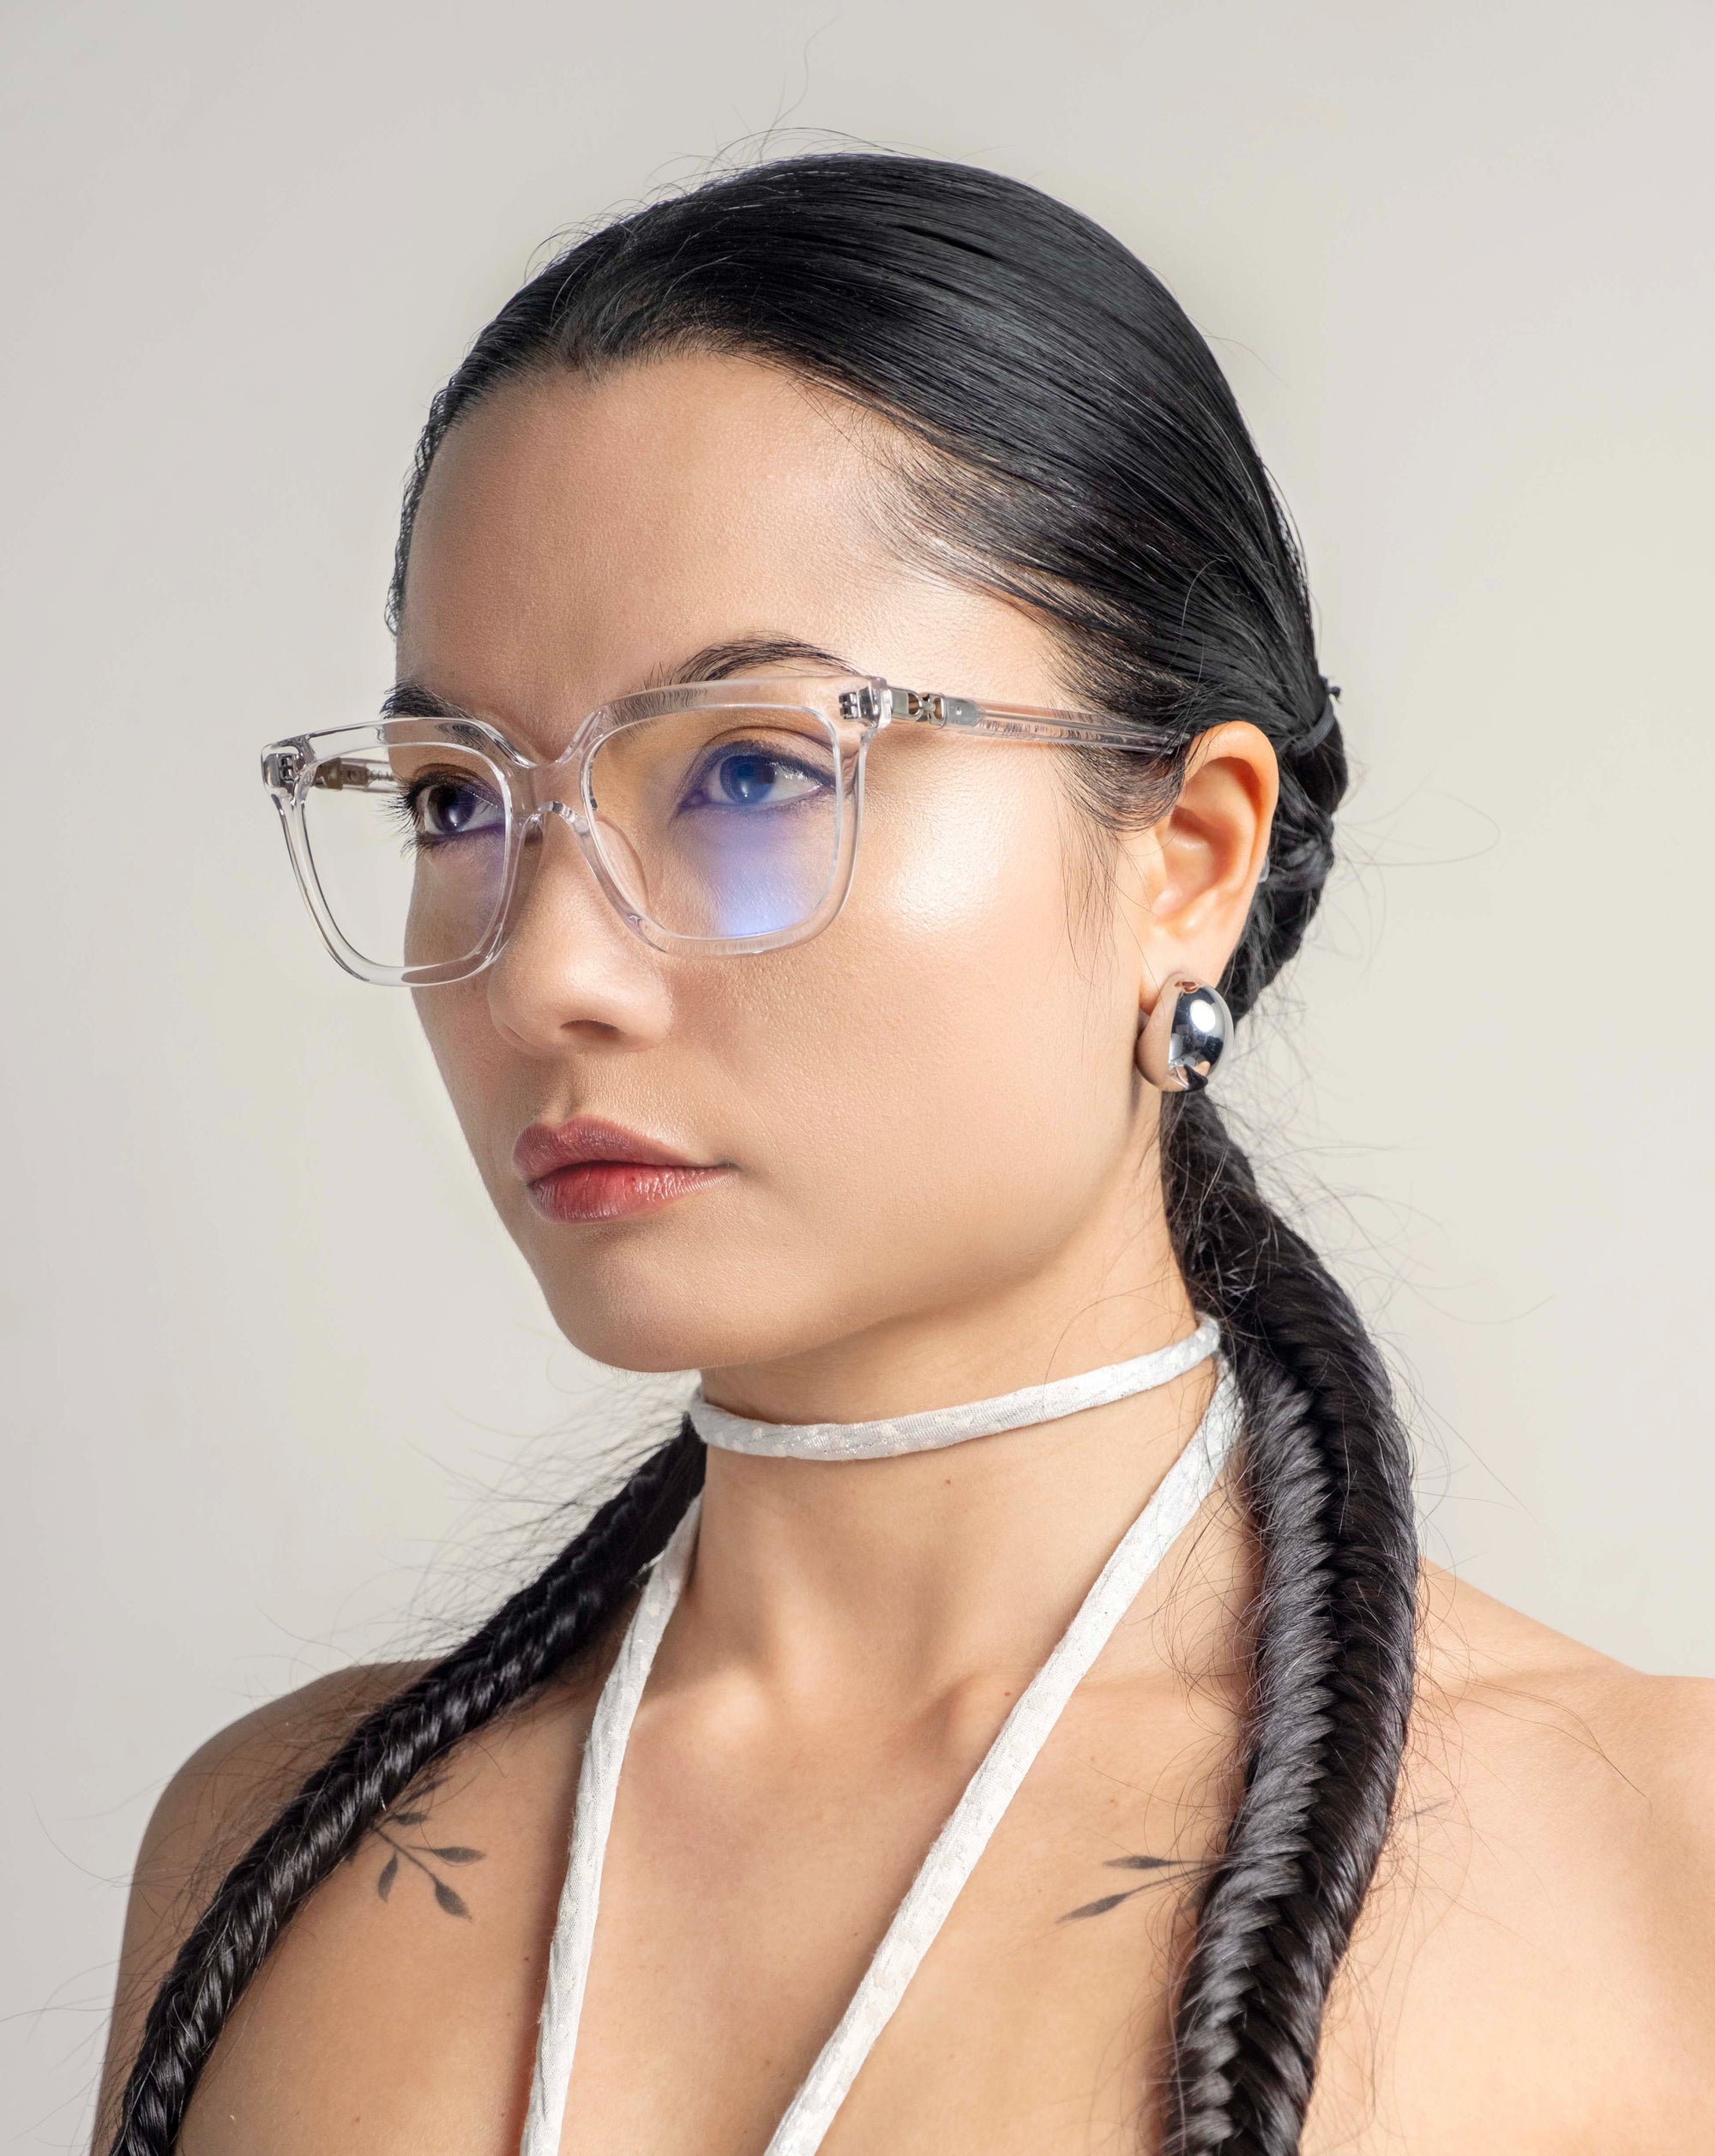 A person with long, dark braided hair is wearing For Art's Sake® Nina glasses and a white choker. They have a serious expression and are dressed in a light-colored top. The classic square silhouette of the glasses adds to their poised look, set against a plain, neutral background.